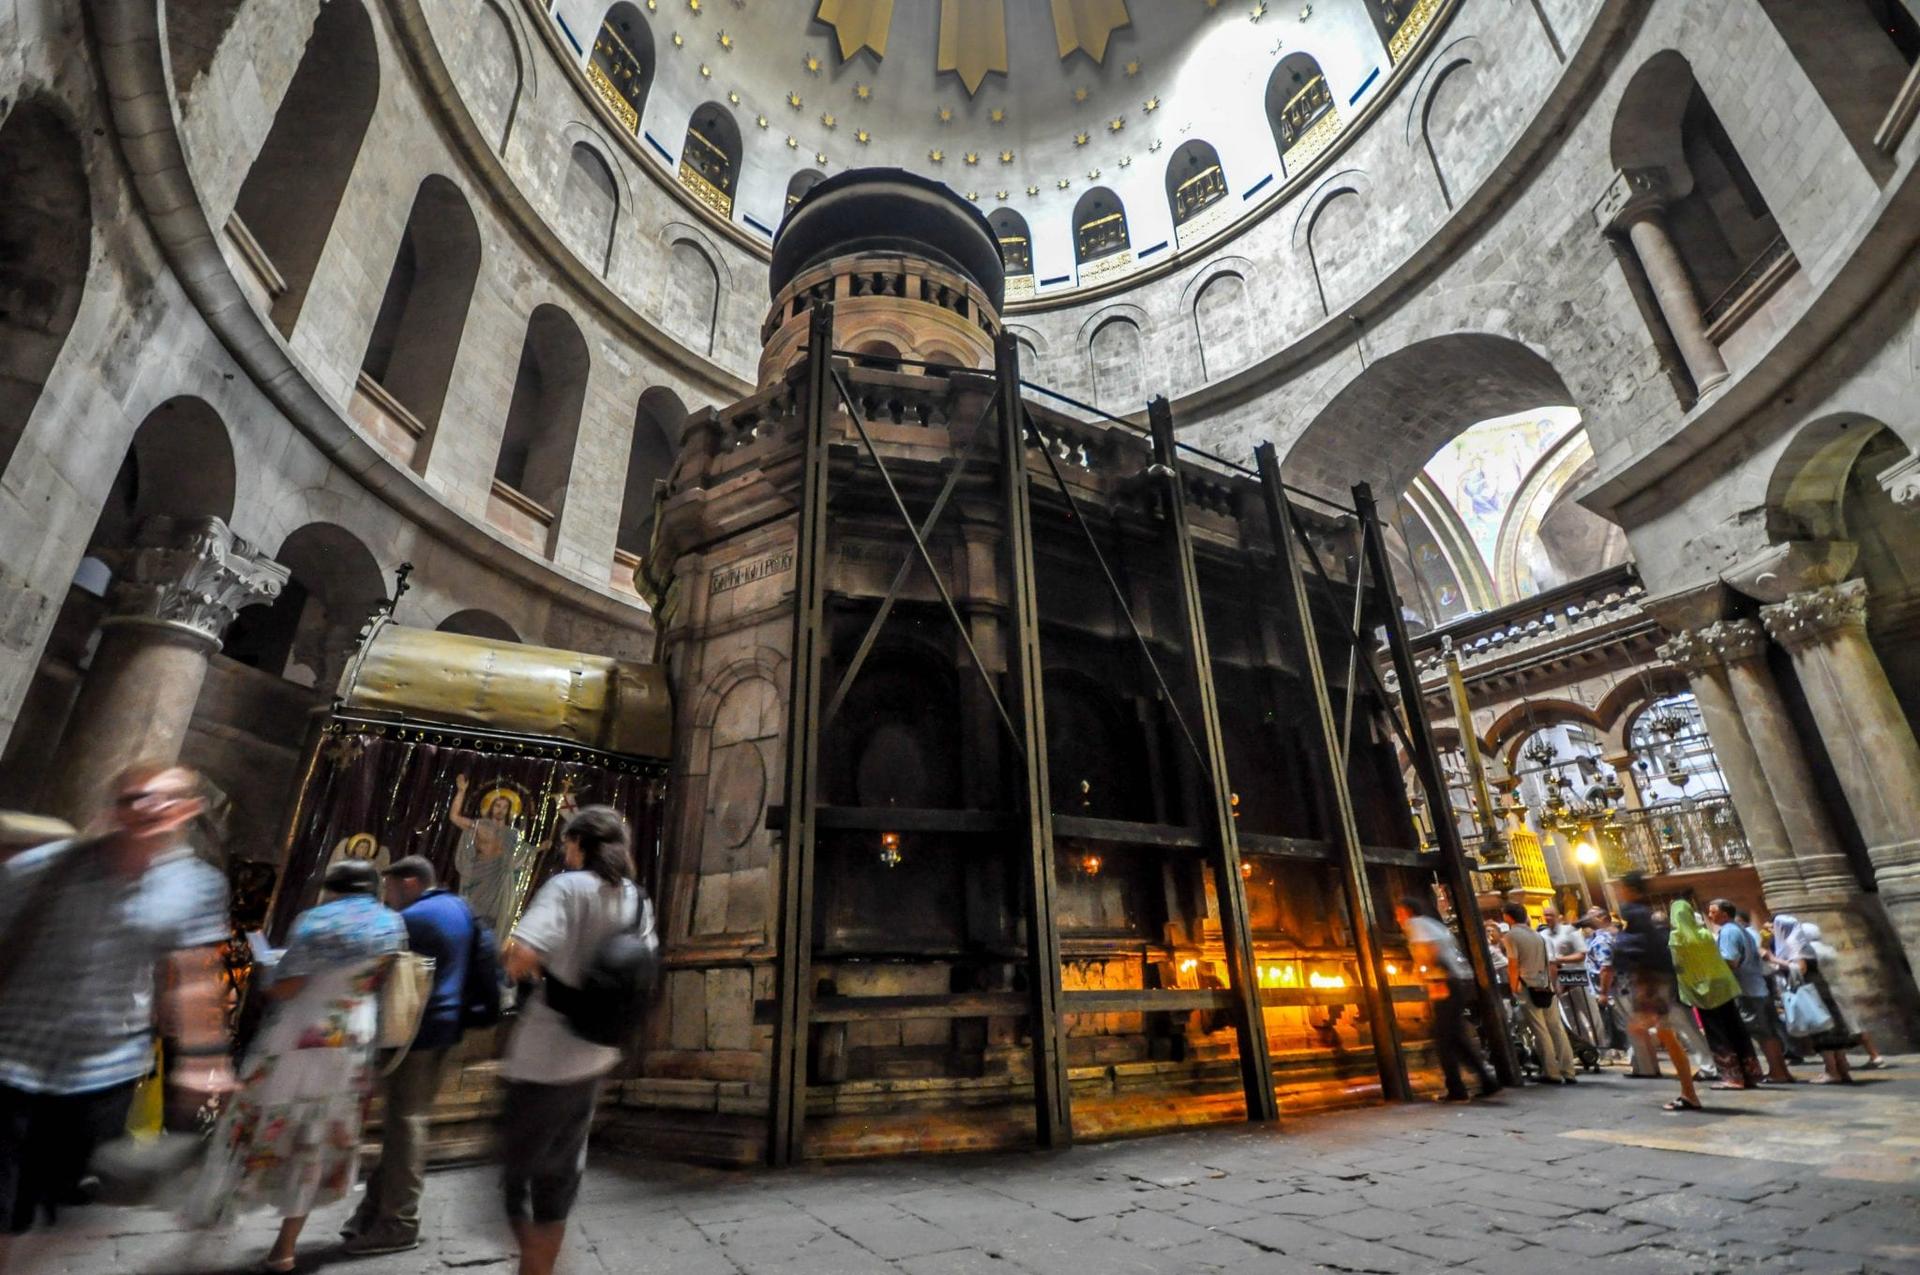 Jesus’ tomb faces major risk of collapse, scientists warn